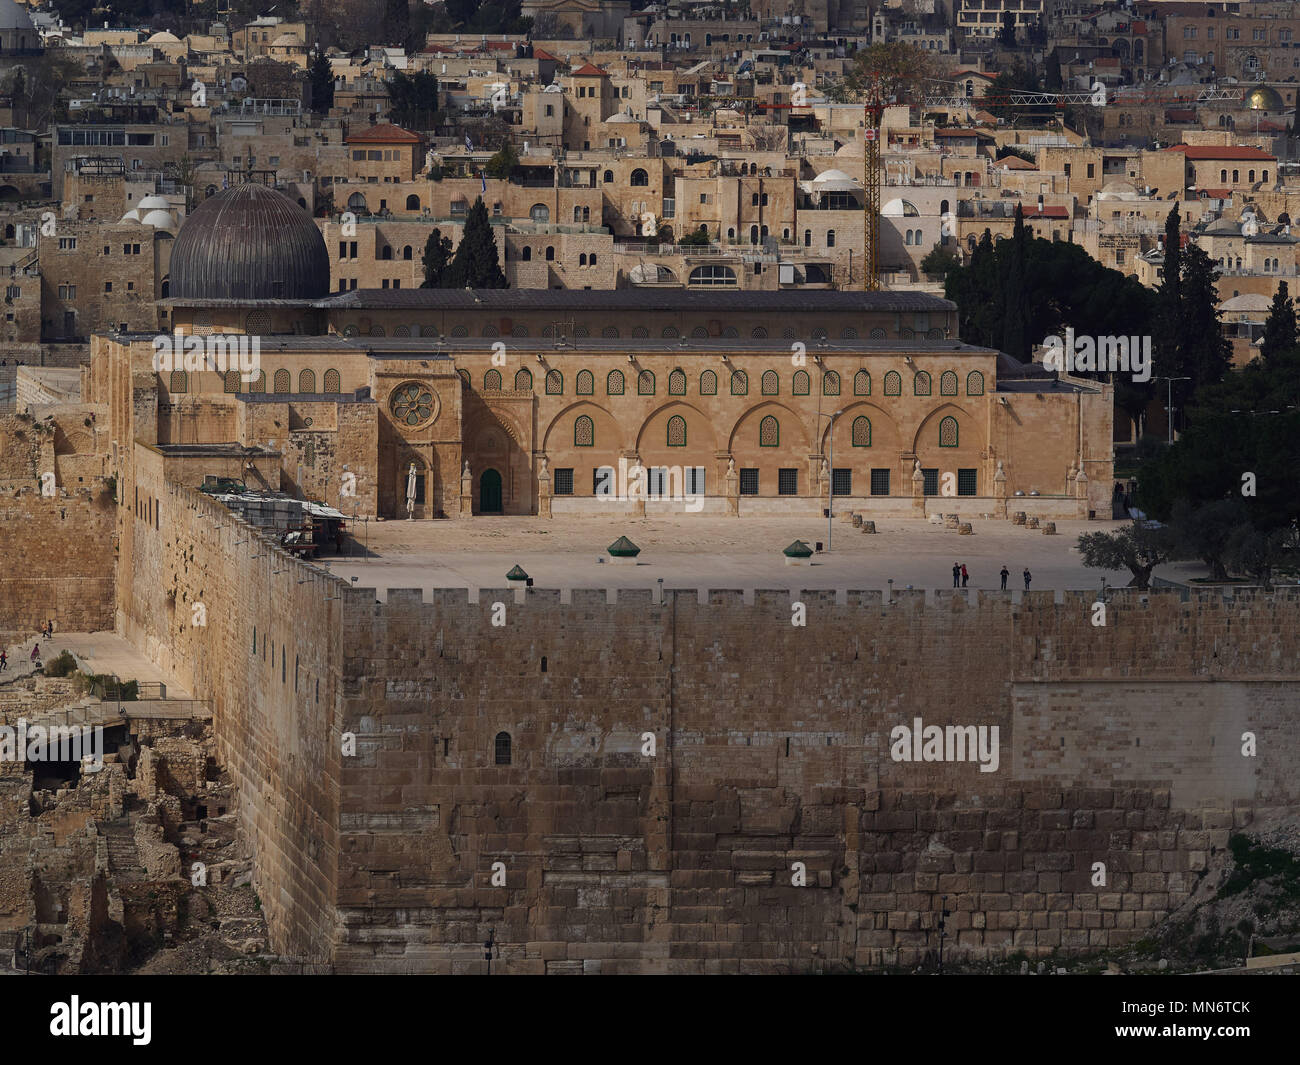 Dome of the mosque of El-Masjid el-Aqsa, located on the Temple Mount of Jerusalem, Israel. Stock Photo